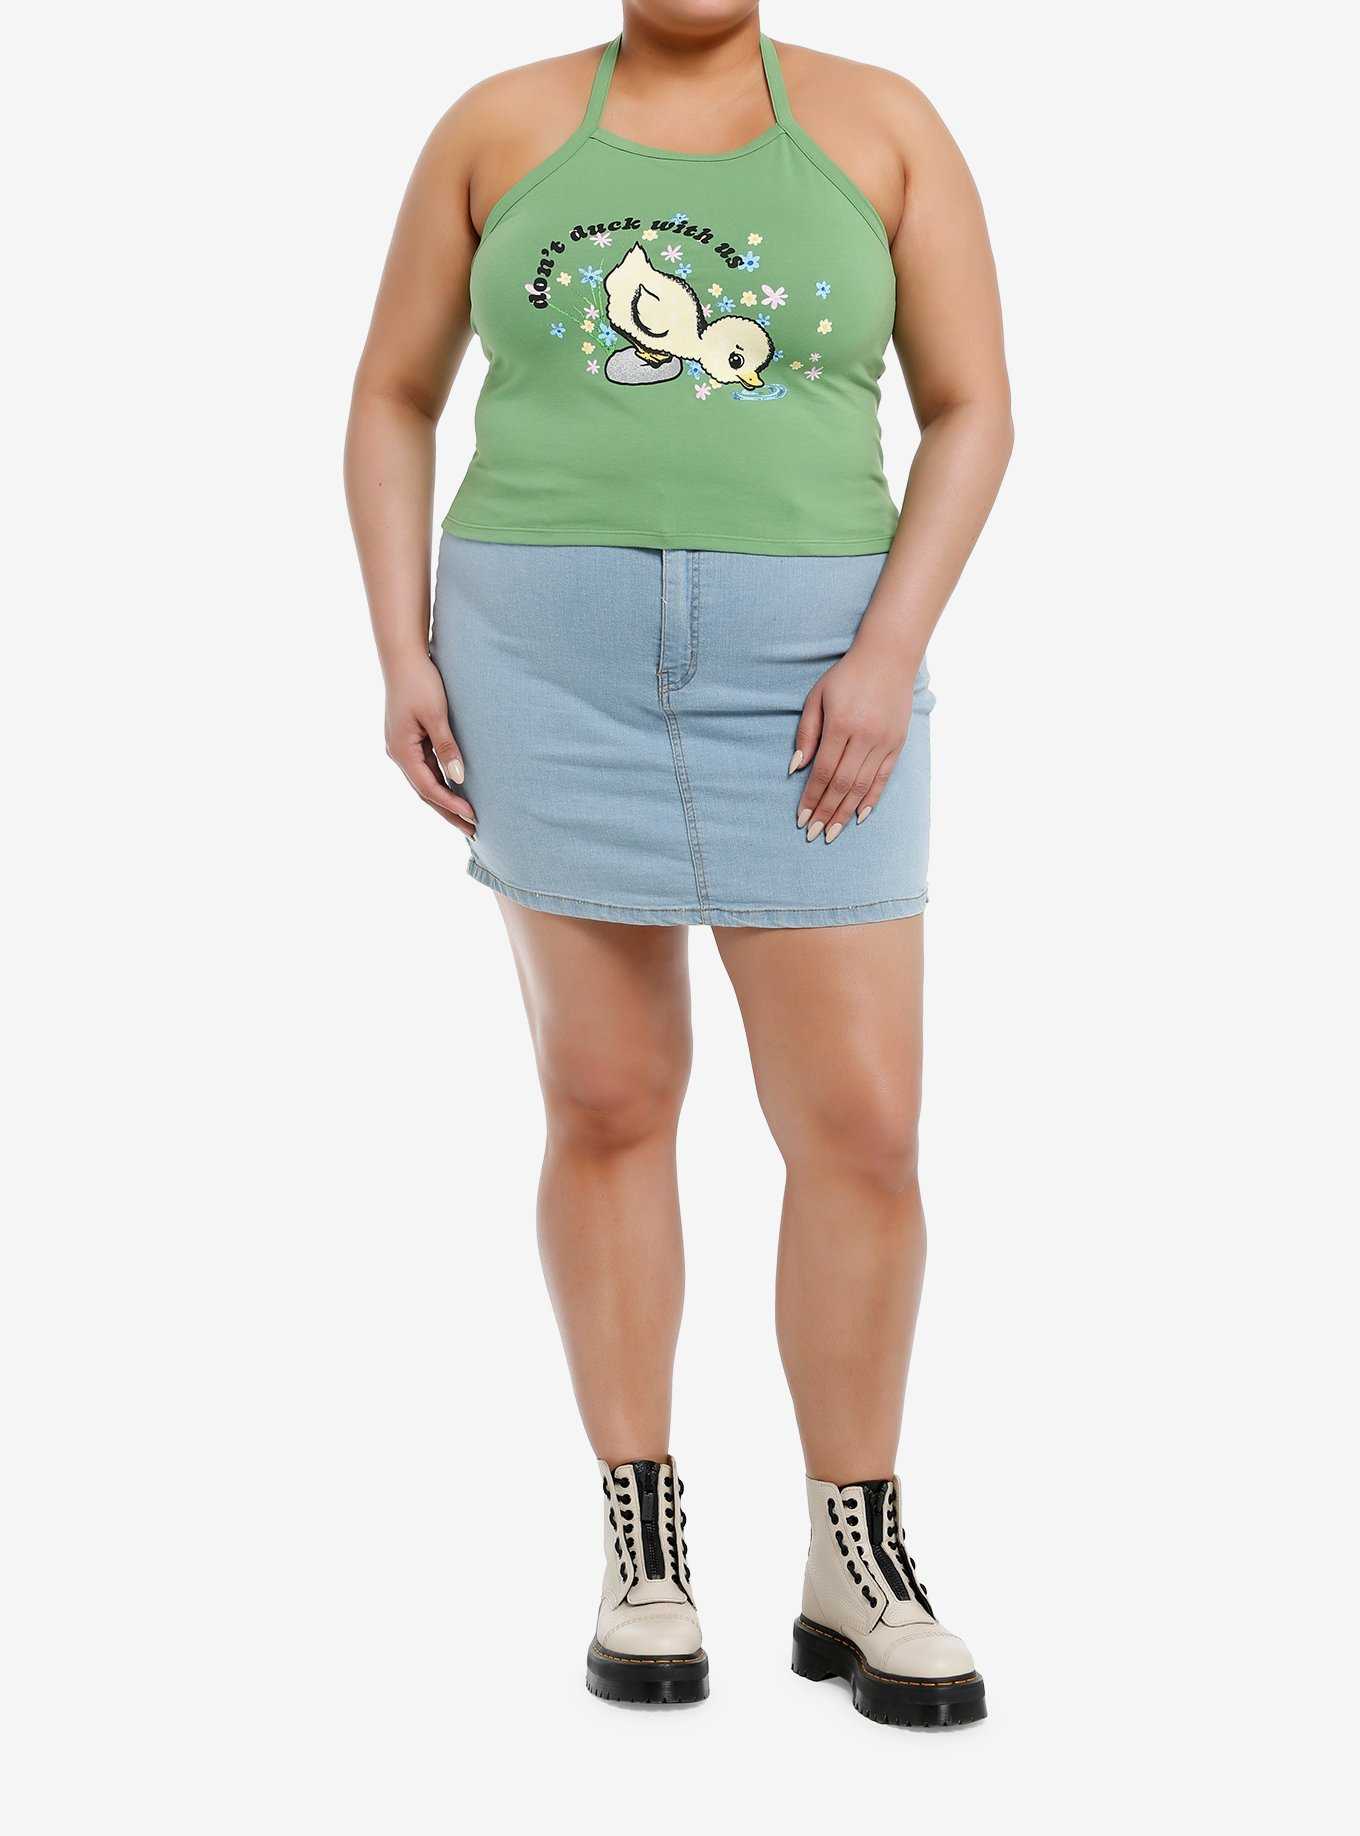 Sweet Society Don't Duck With Us Green Girls Halter Top Plus Size, , hi-res